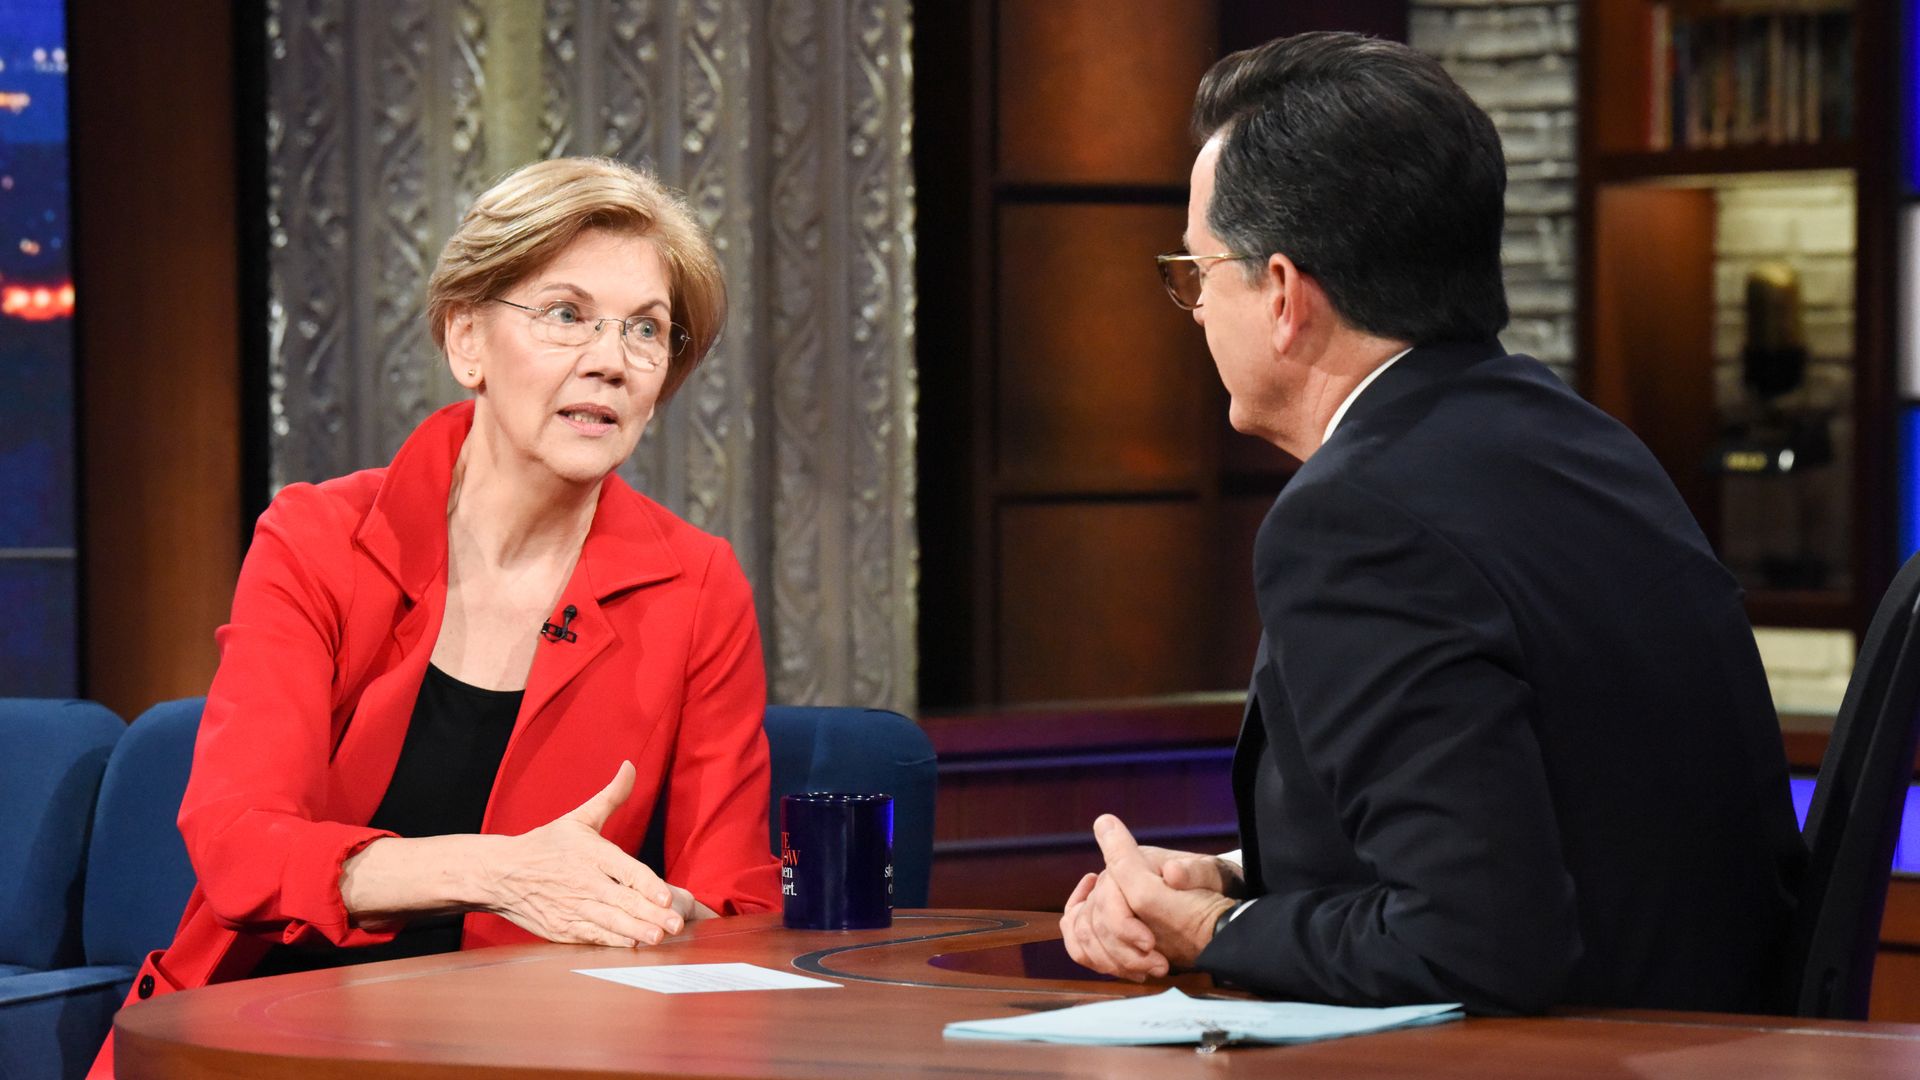 Elizabeth Warren told Stephen Colbert she doesn't think voters care about the Mueller report.